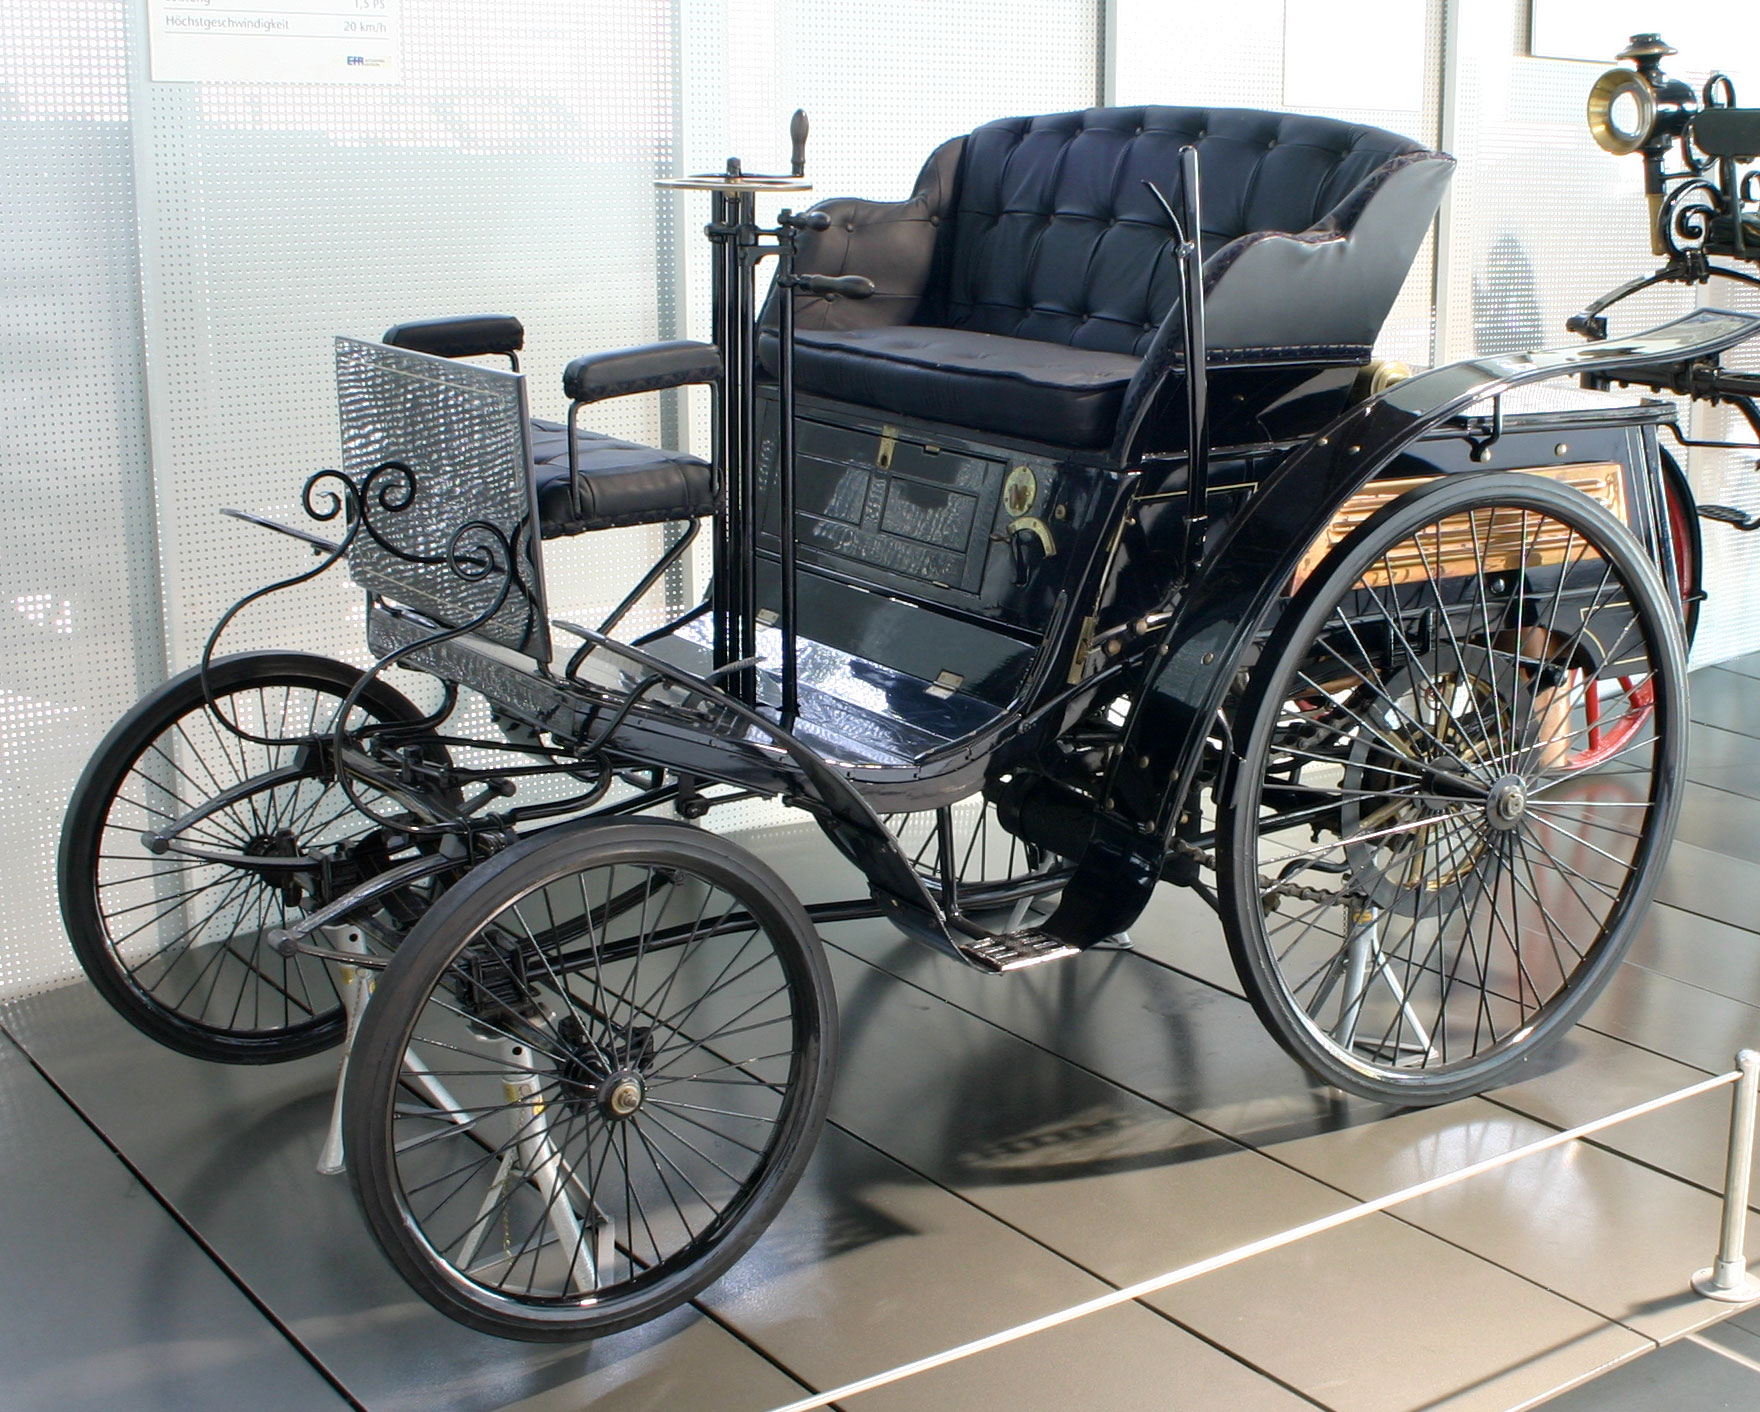 Benz 1640 tourer Photo Gallery: Photo #10 out of 8, Image Size ...